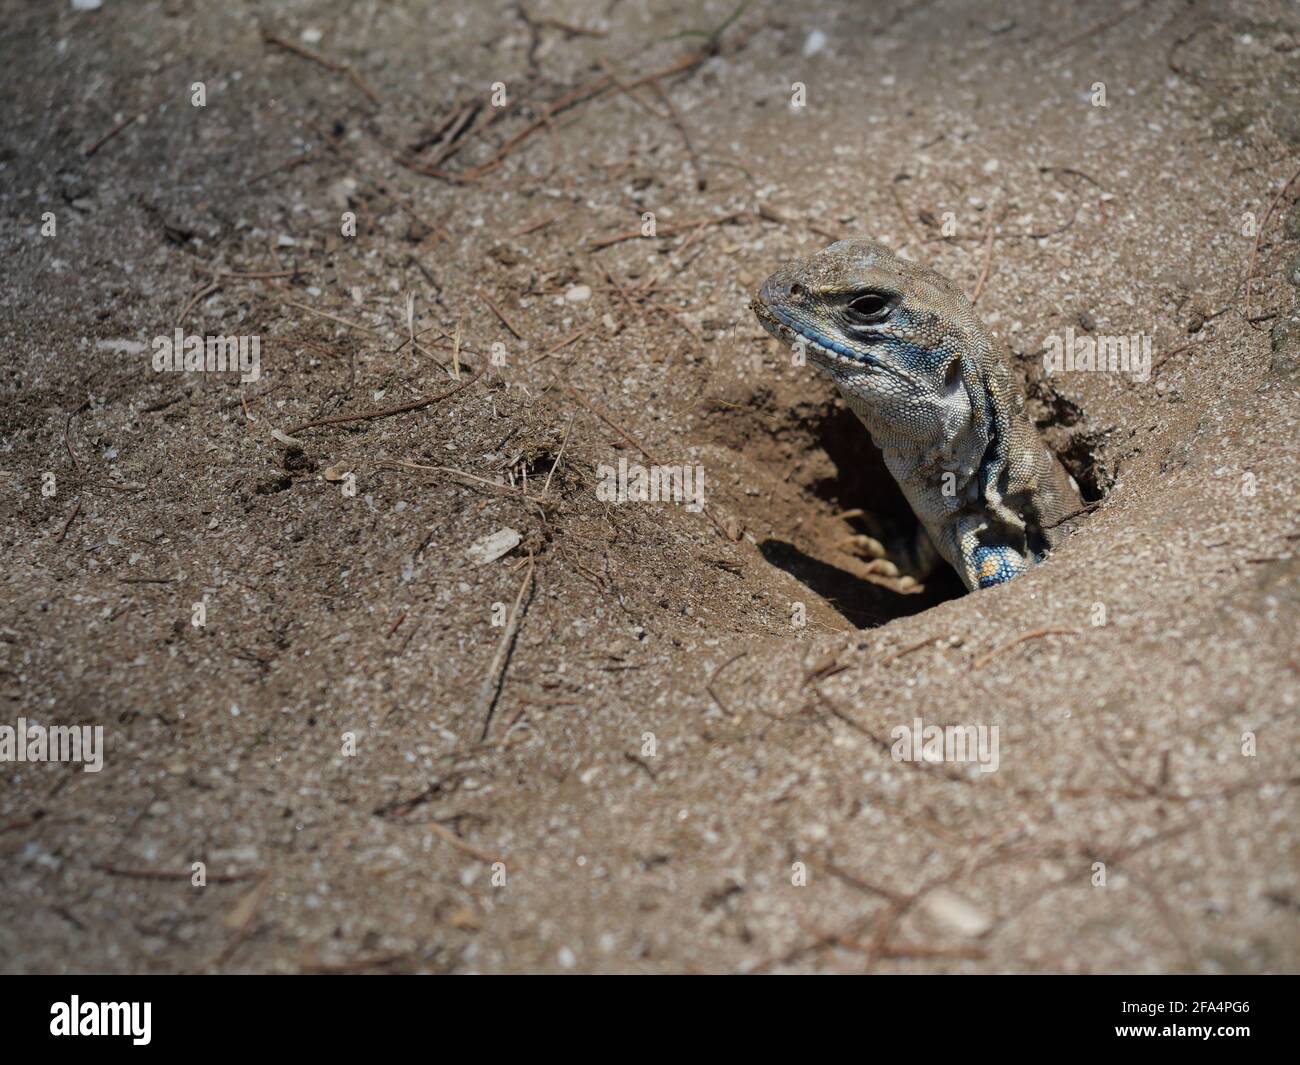 Butterfly agama or Small-scaled or Ground lizard in the burrow on the sand at Khao Sam Roi Yot National Park, Orange and black color stripes on skin Stock Photo